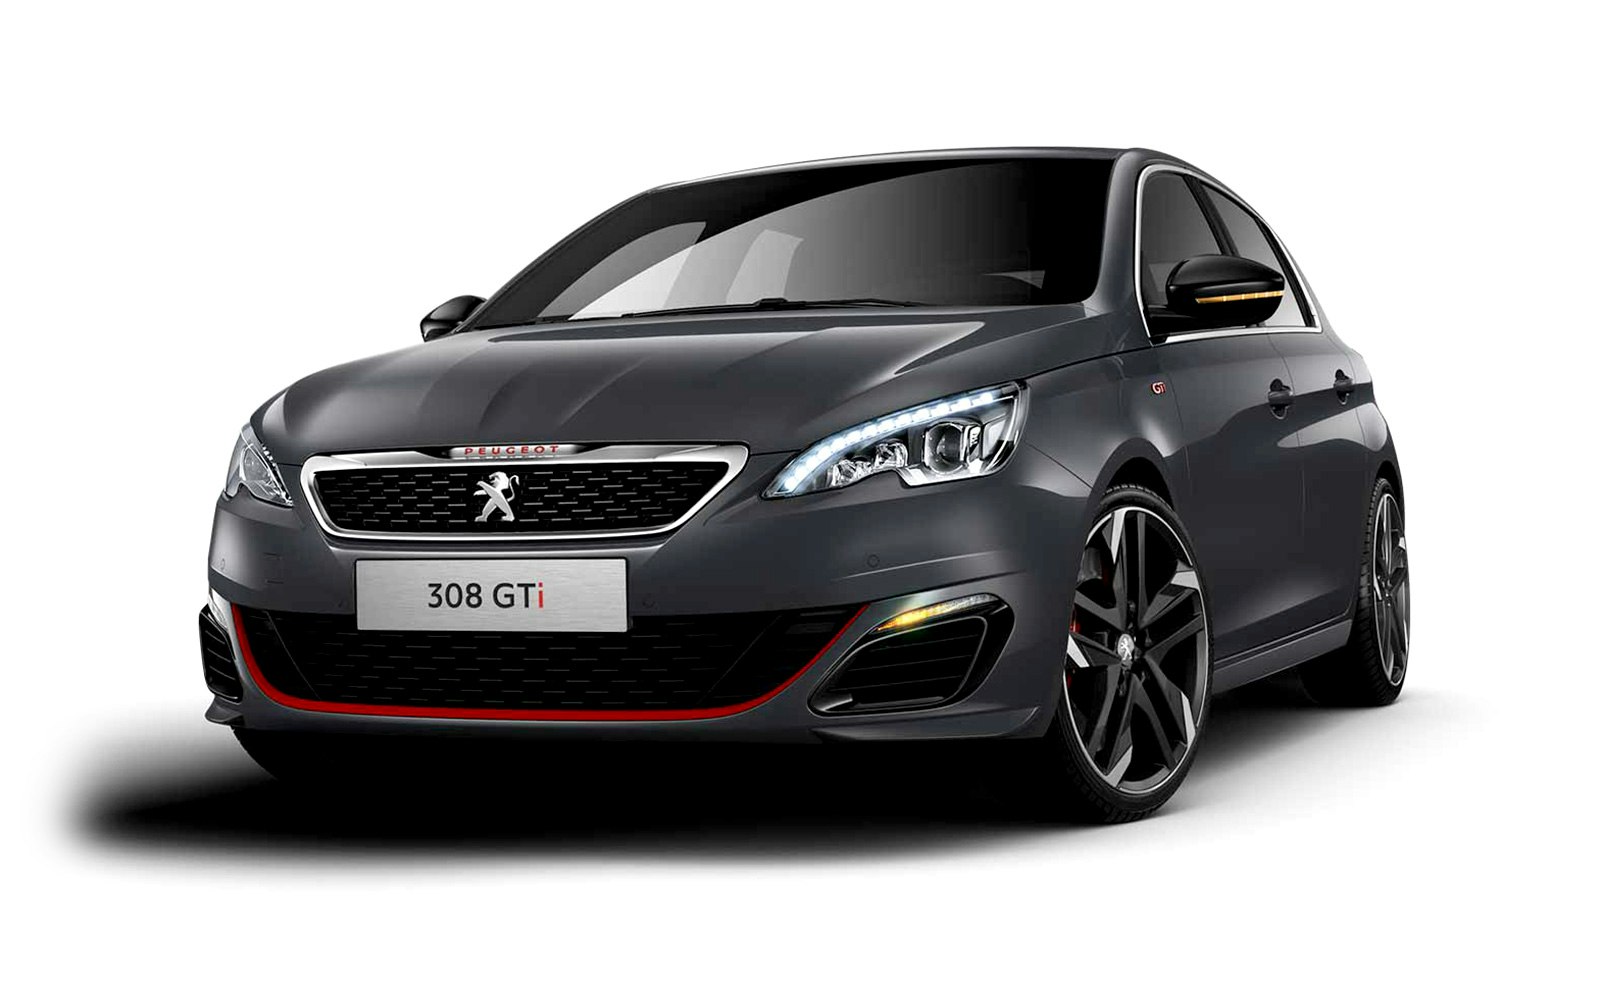 ANALYSIS - Peugeot 308 SW and GTI - Just Auto